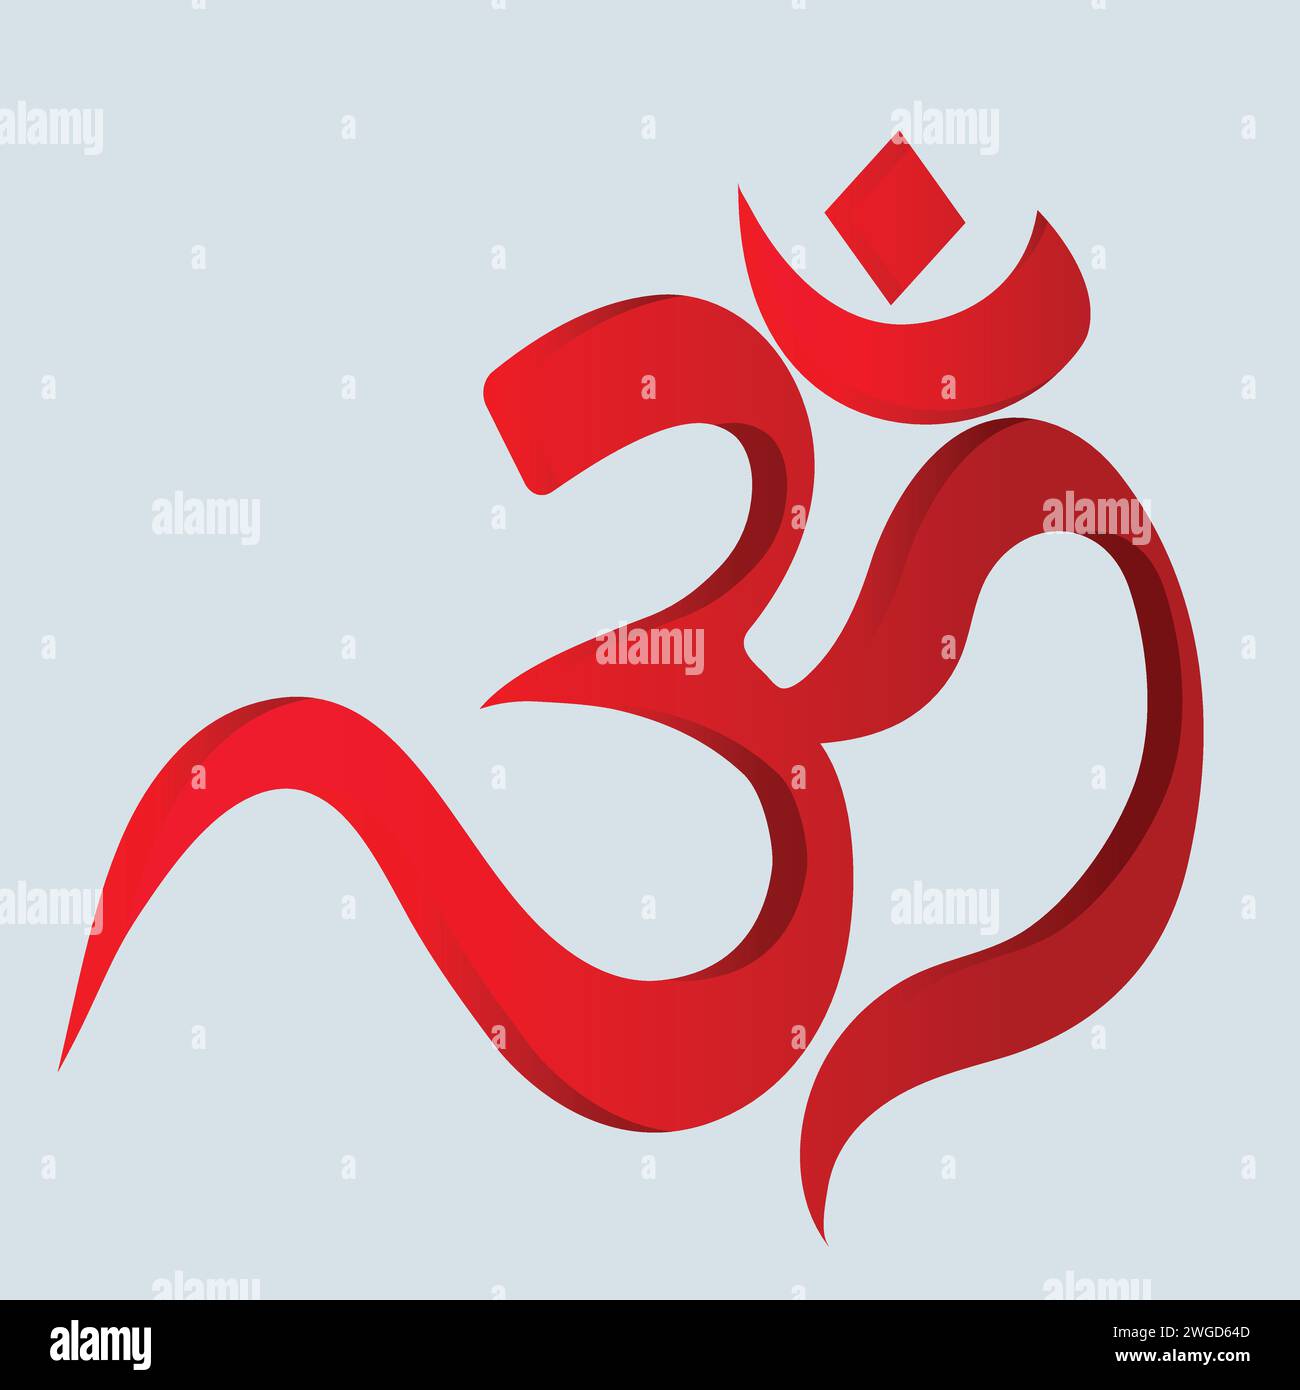 Indian hinduism and lord shiva holy symbol om vector illustration Stock Vector